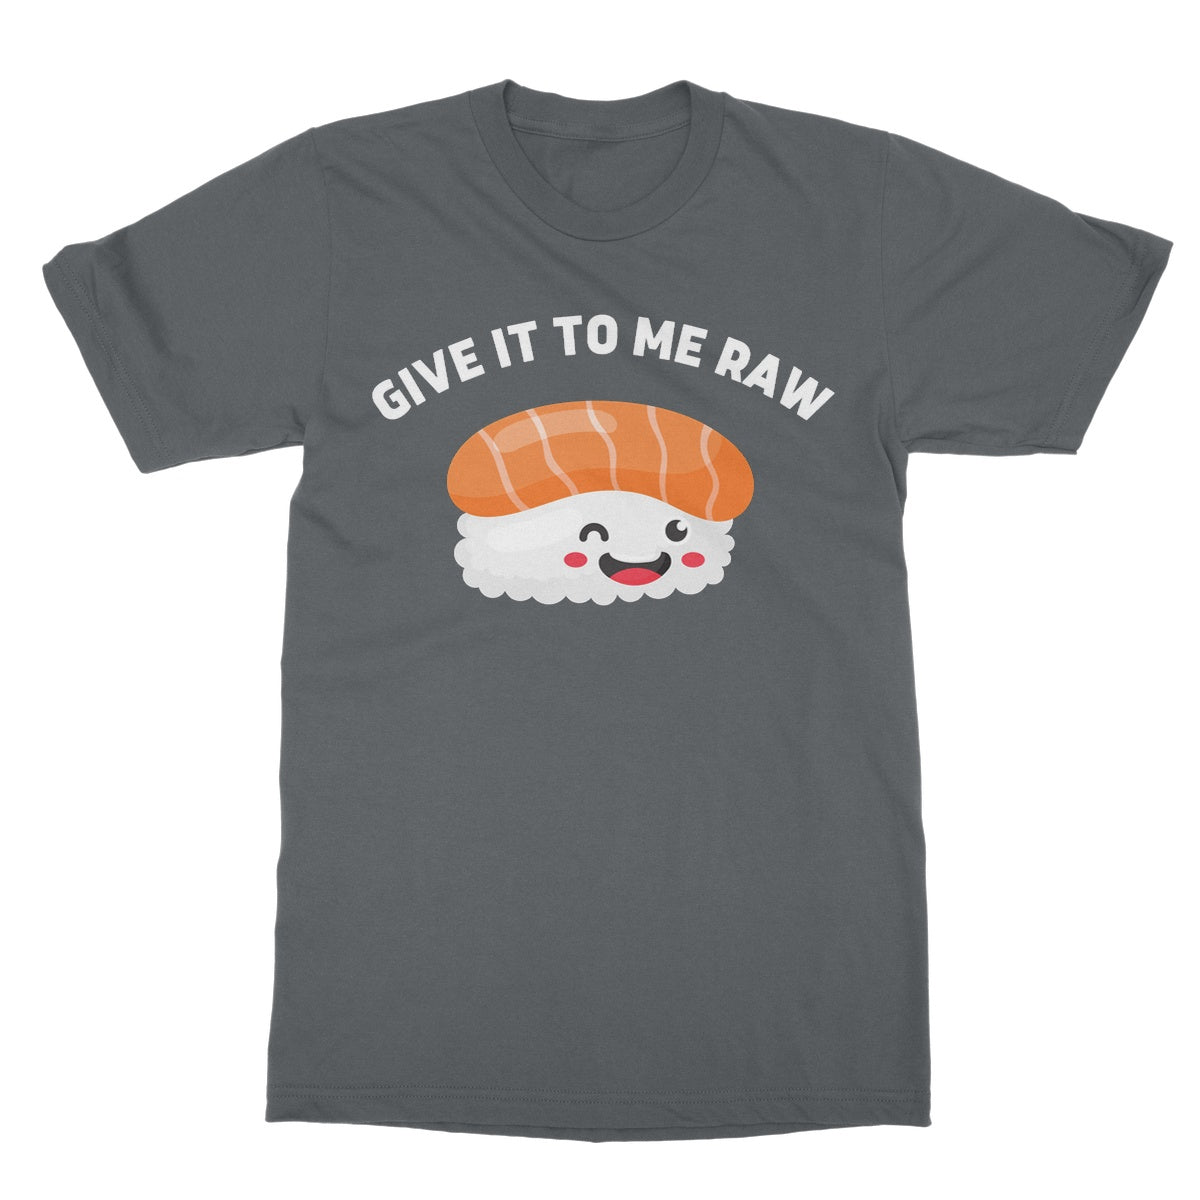 give it to me raw t shirt grey